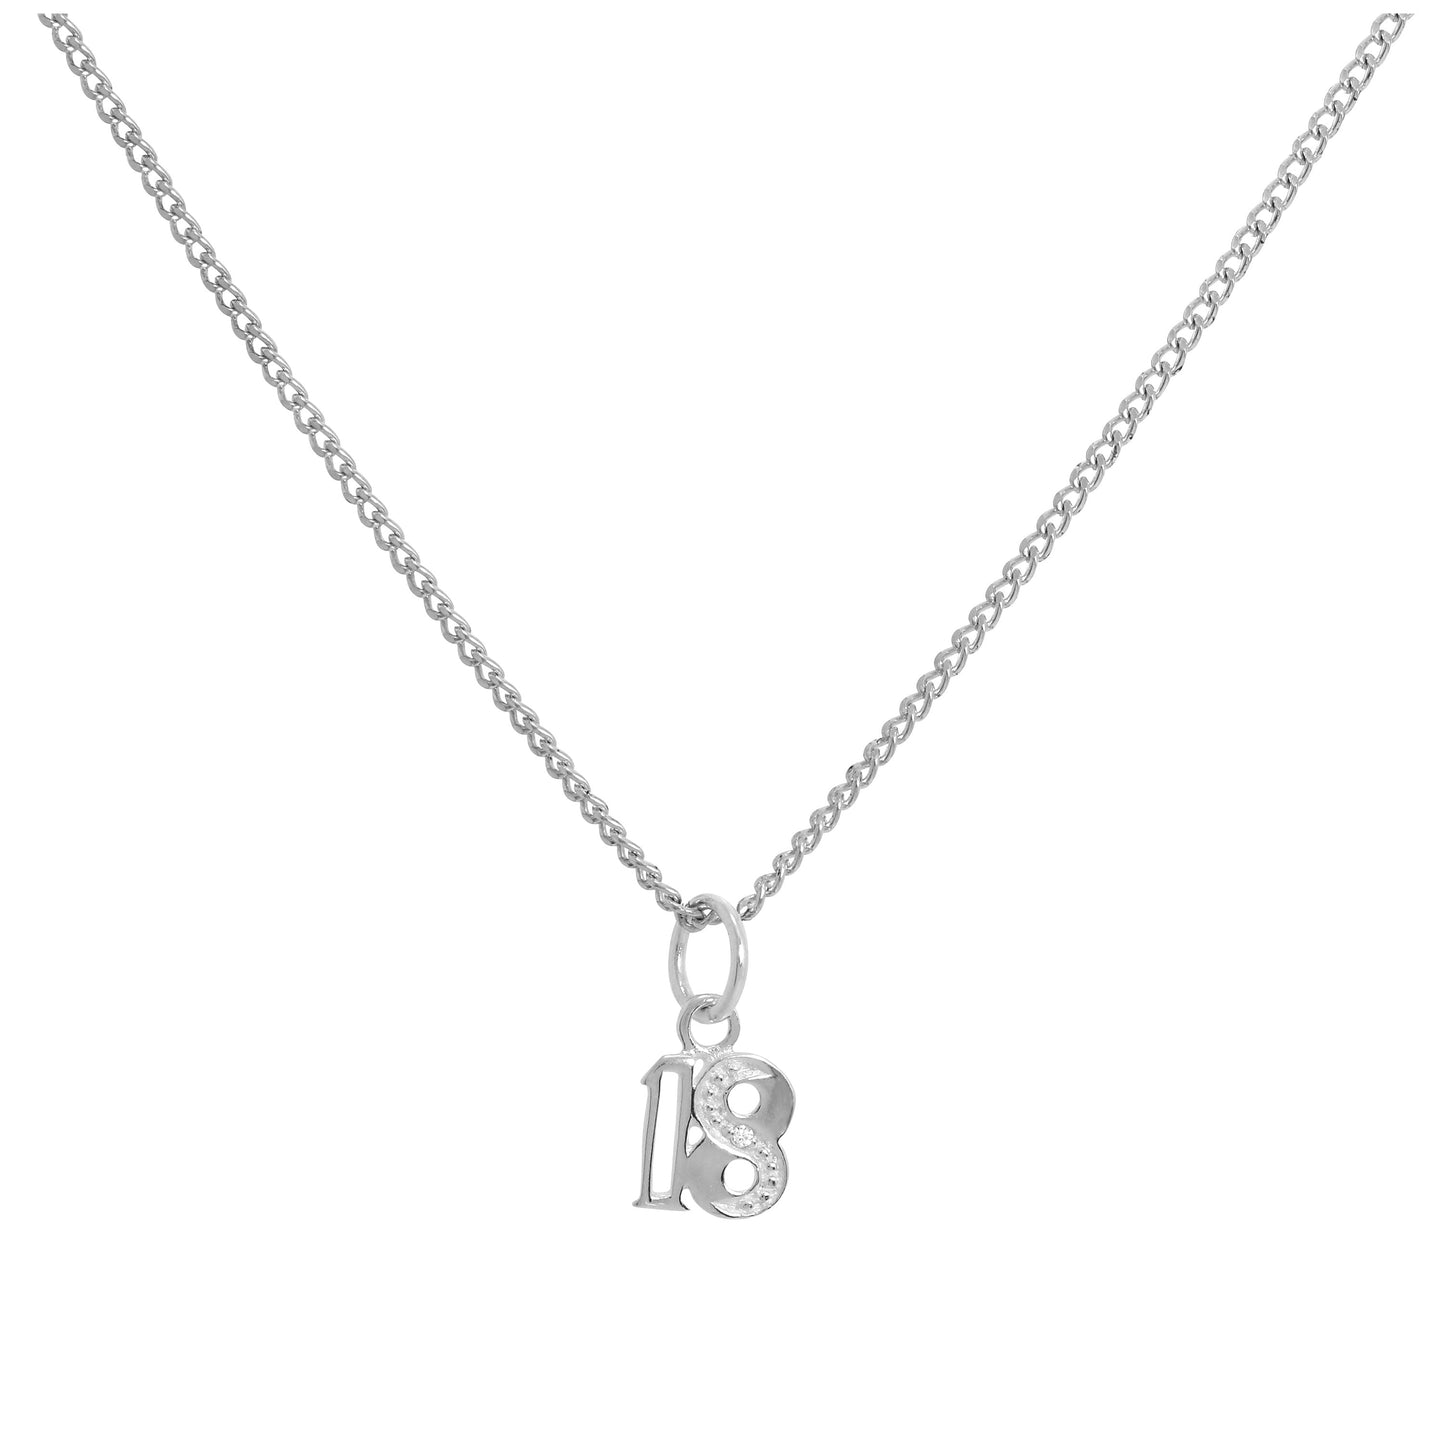 Sterling Silver & Clear CZ Crystal 18 Pendant Necklace 16 - 24 Inches